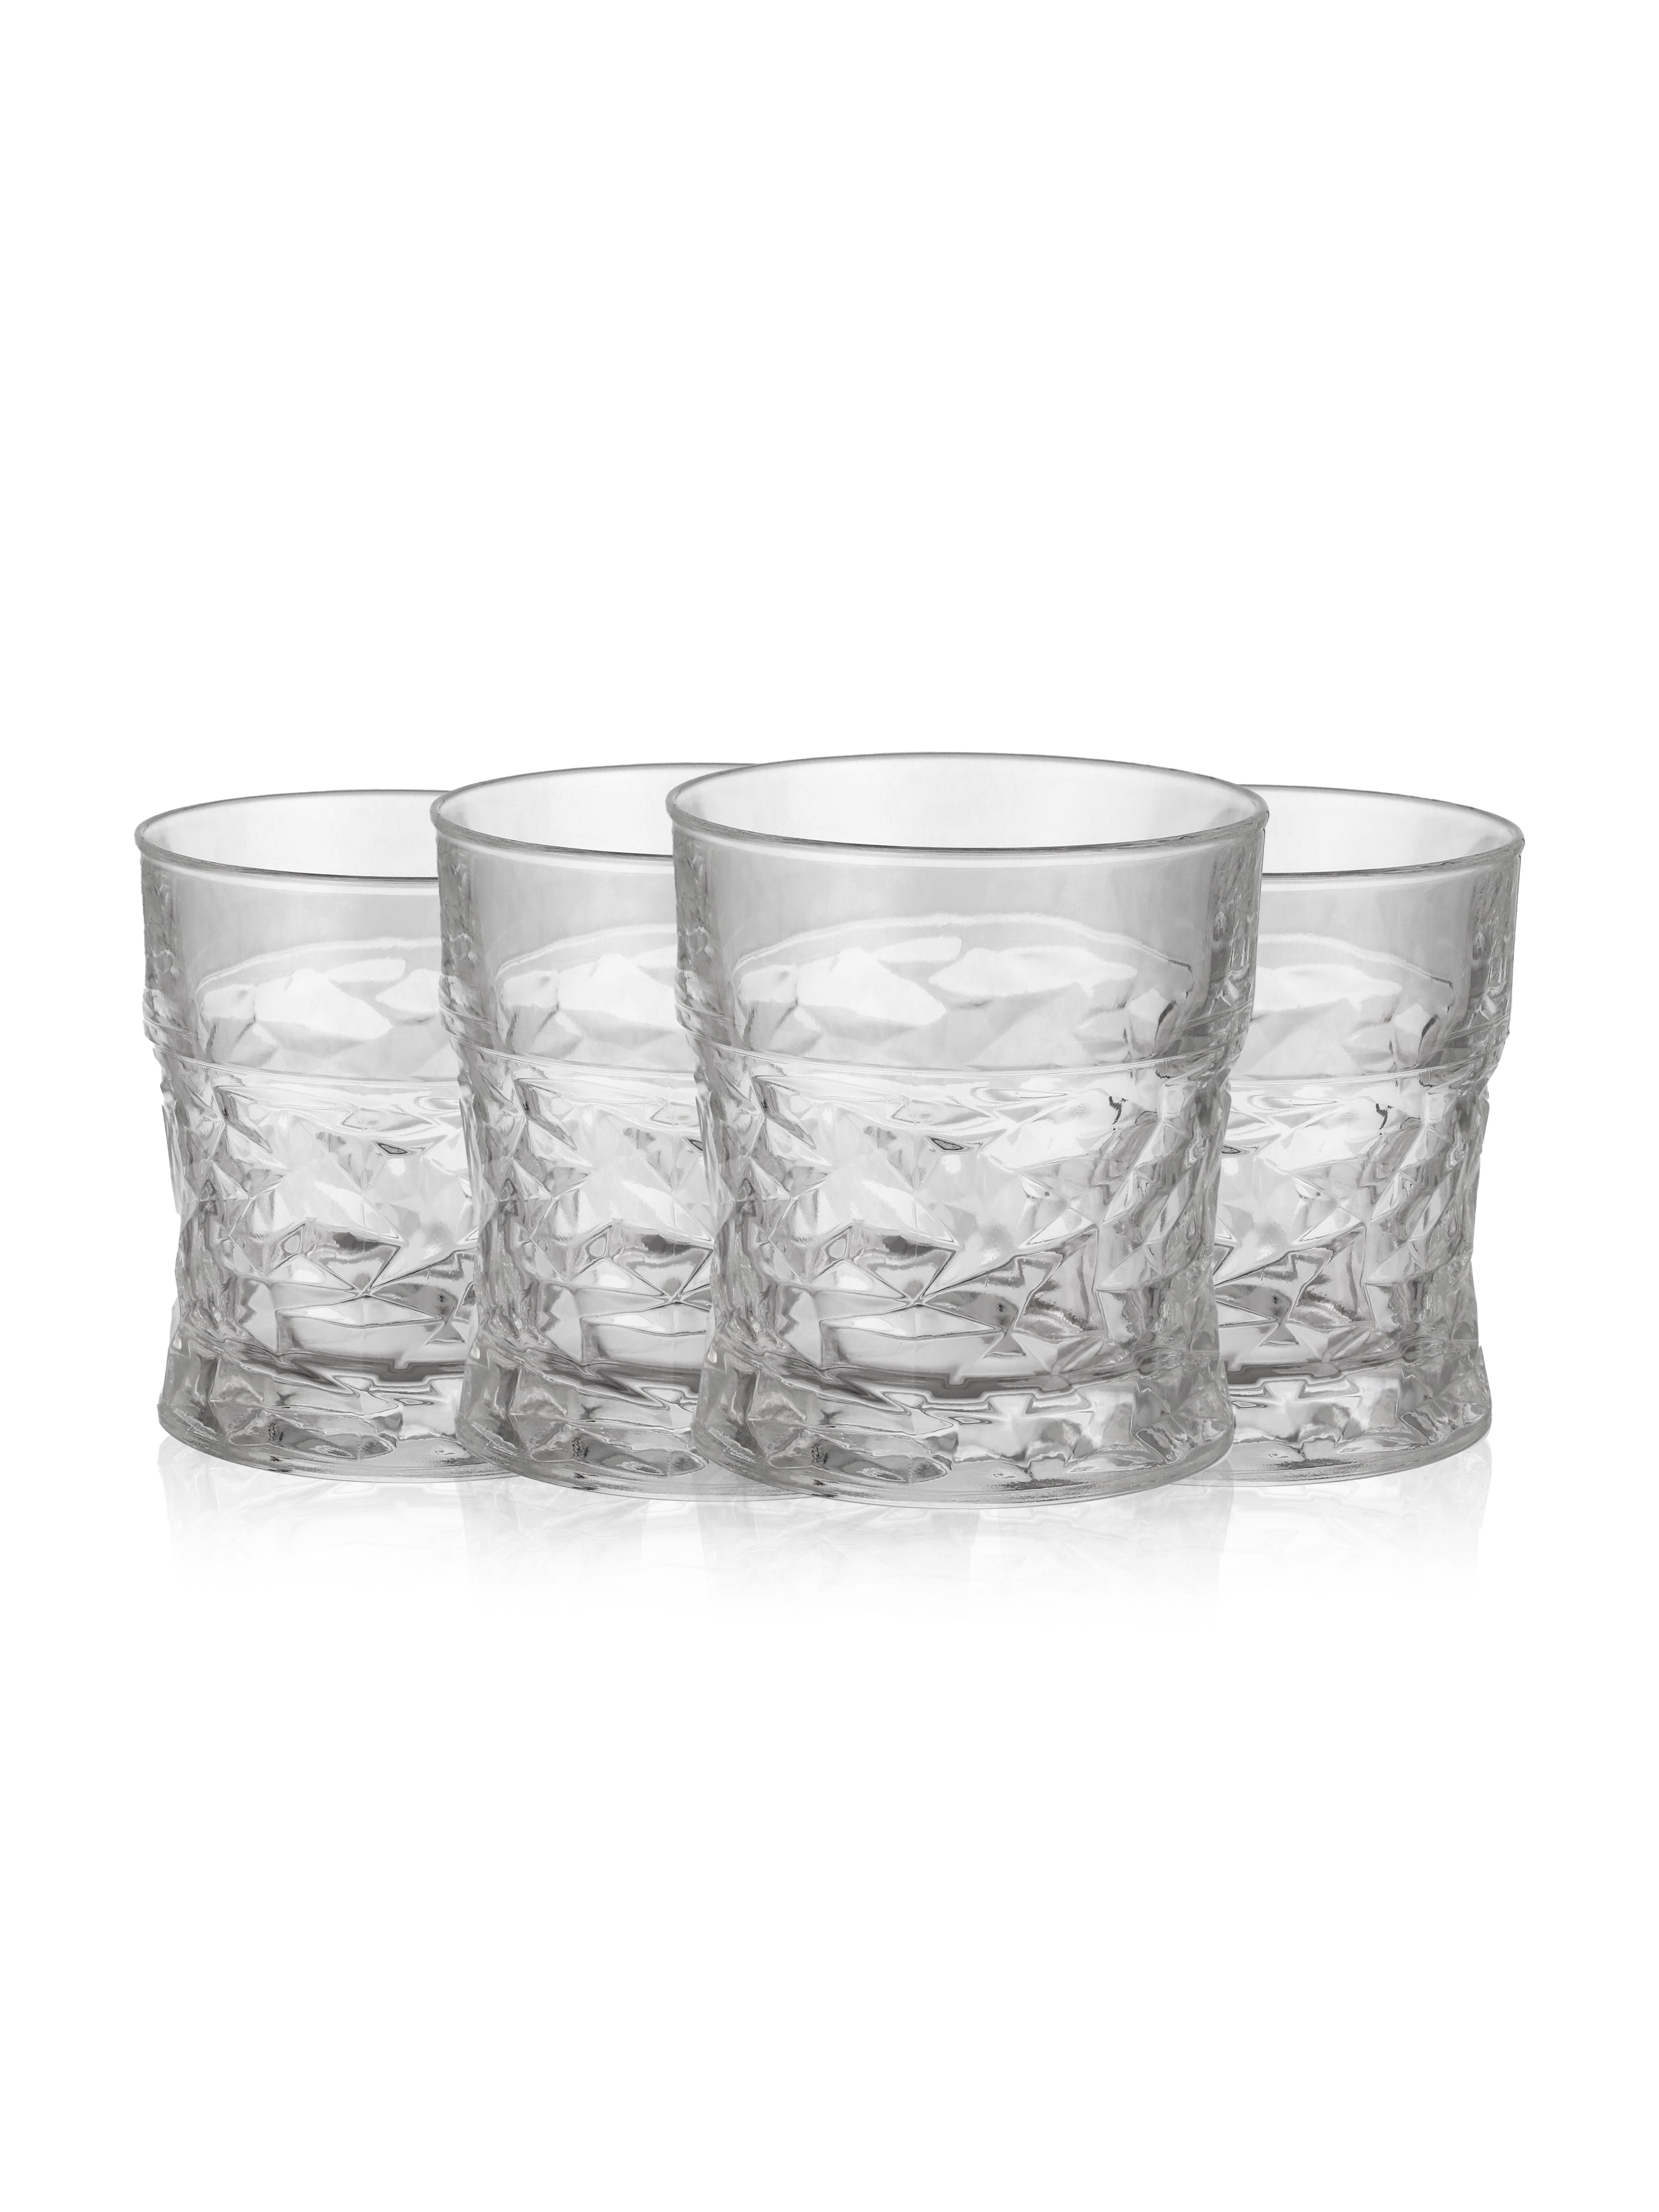 ECLECTIC CRYSTAL WHISKEY GLASS - ITALIAN CRYSTAL - SET OF 6